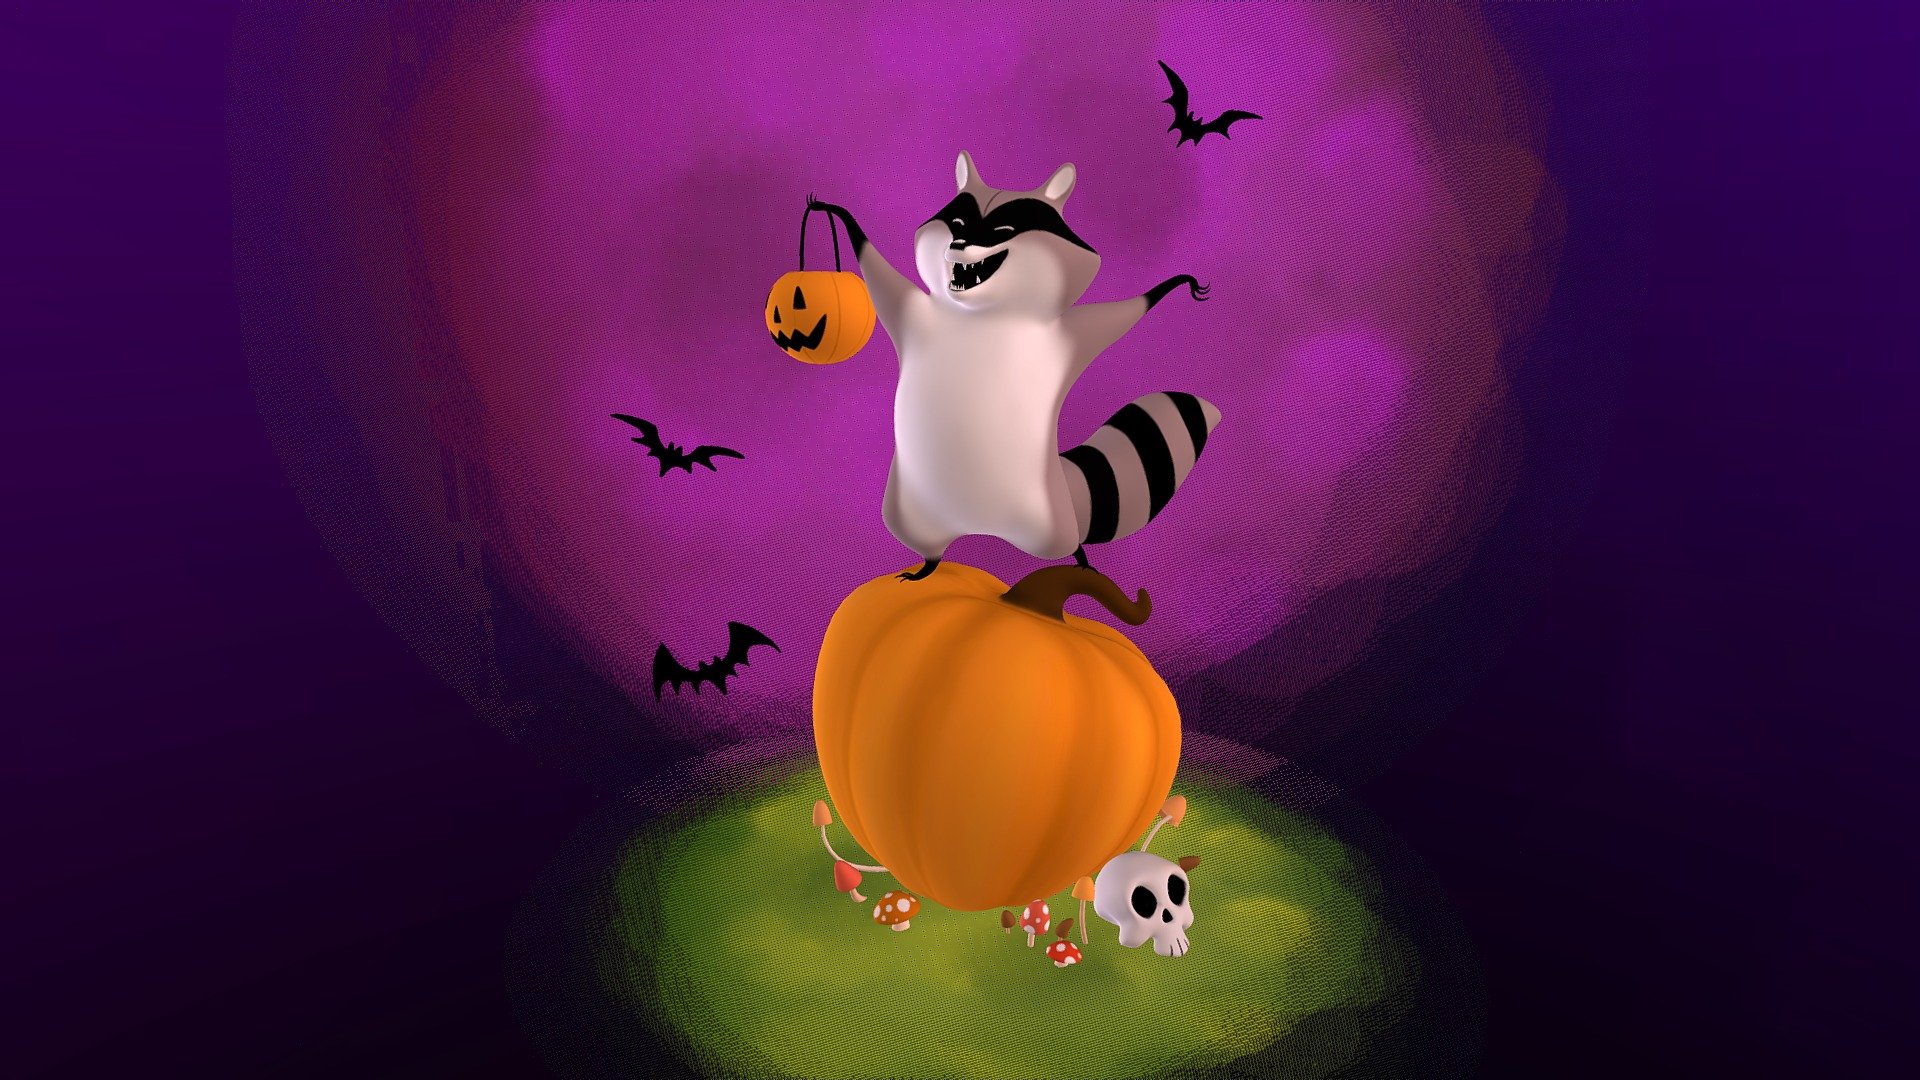 Simkaye's concept : http://cooncomic.com/page/2

I wanted to do something for Halloween and this great concept gave me a lot of motivation! - Halloween Raccoon - 3D model by Caroline (@Amaringer) 3d model